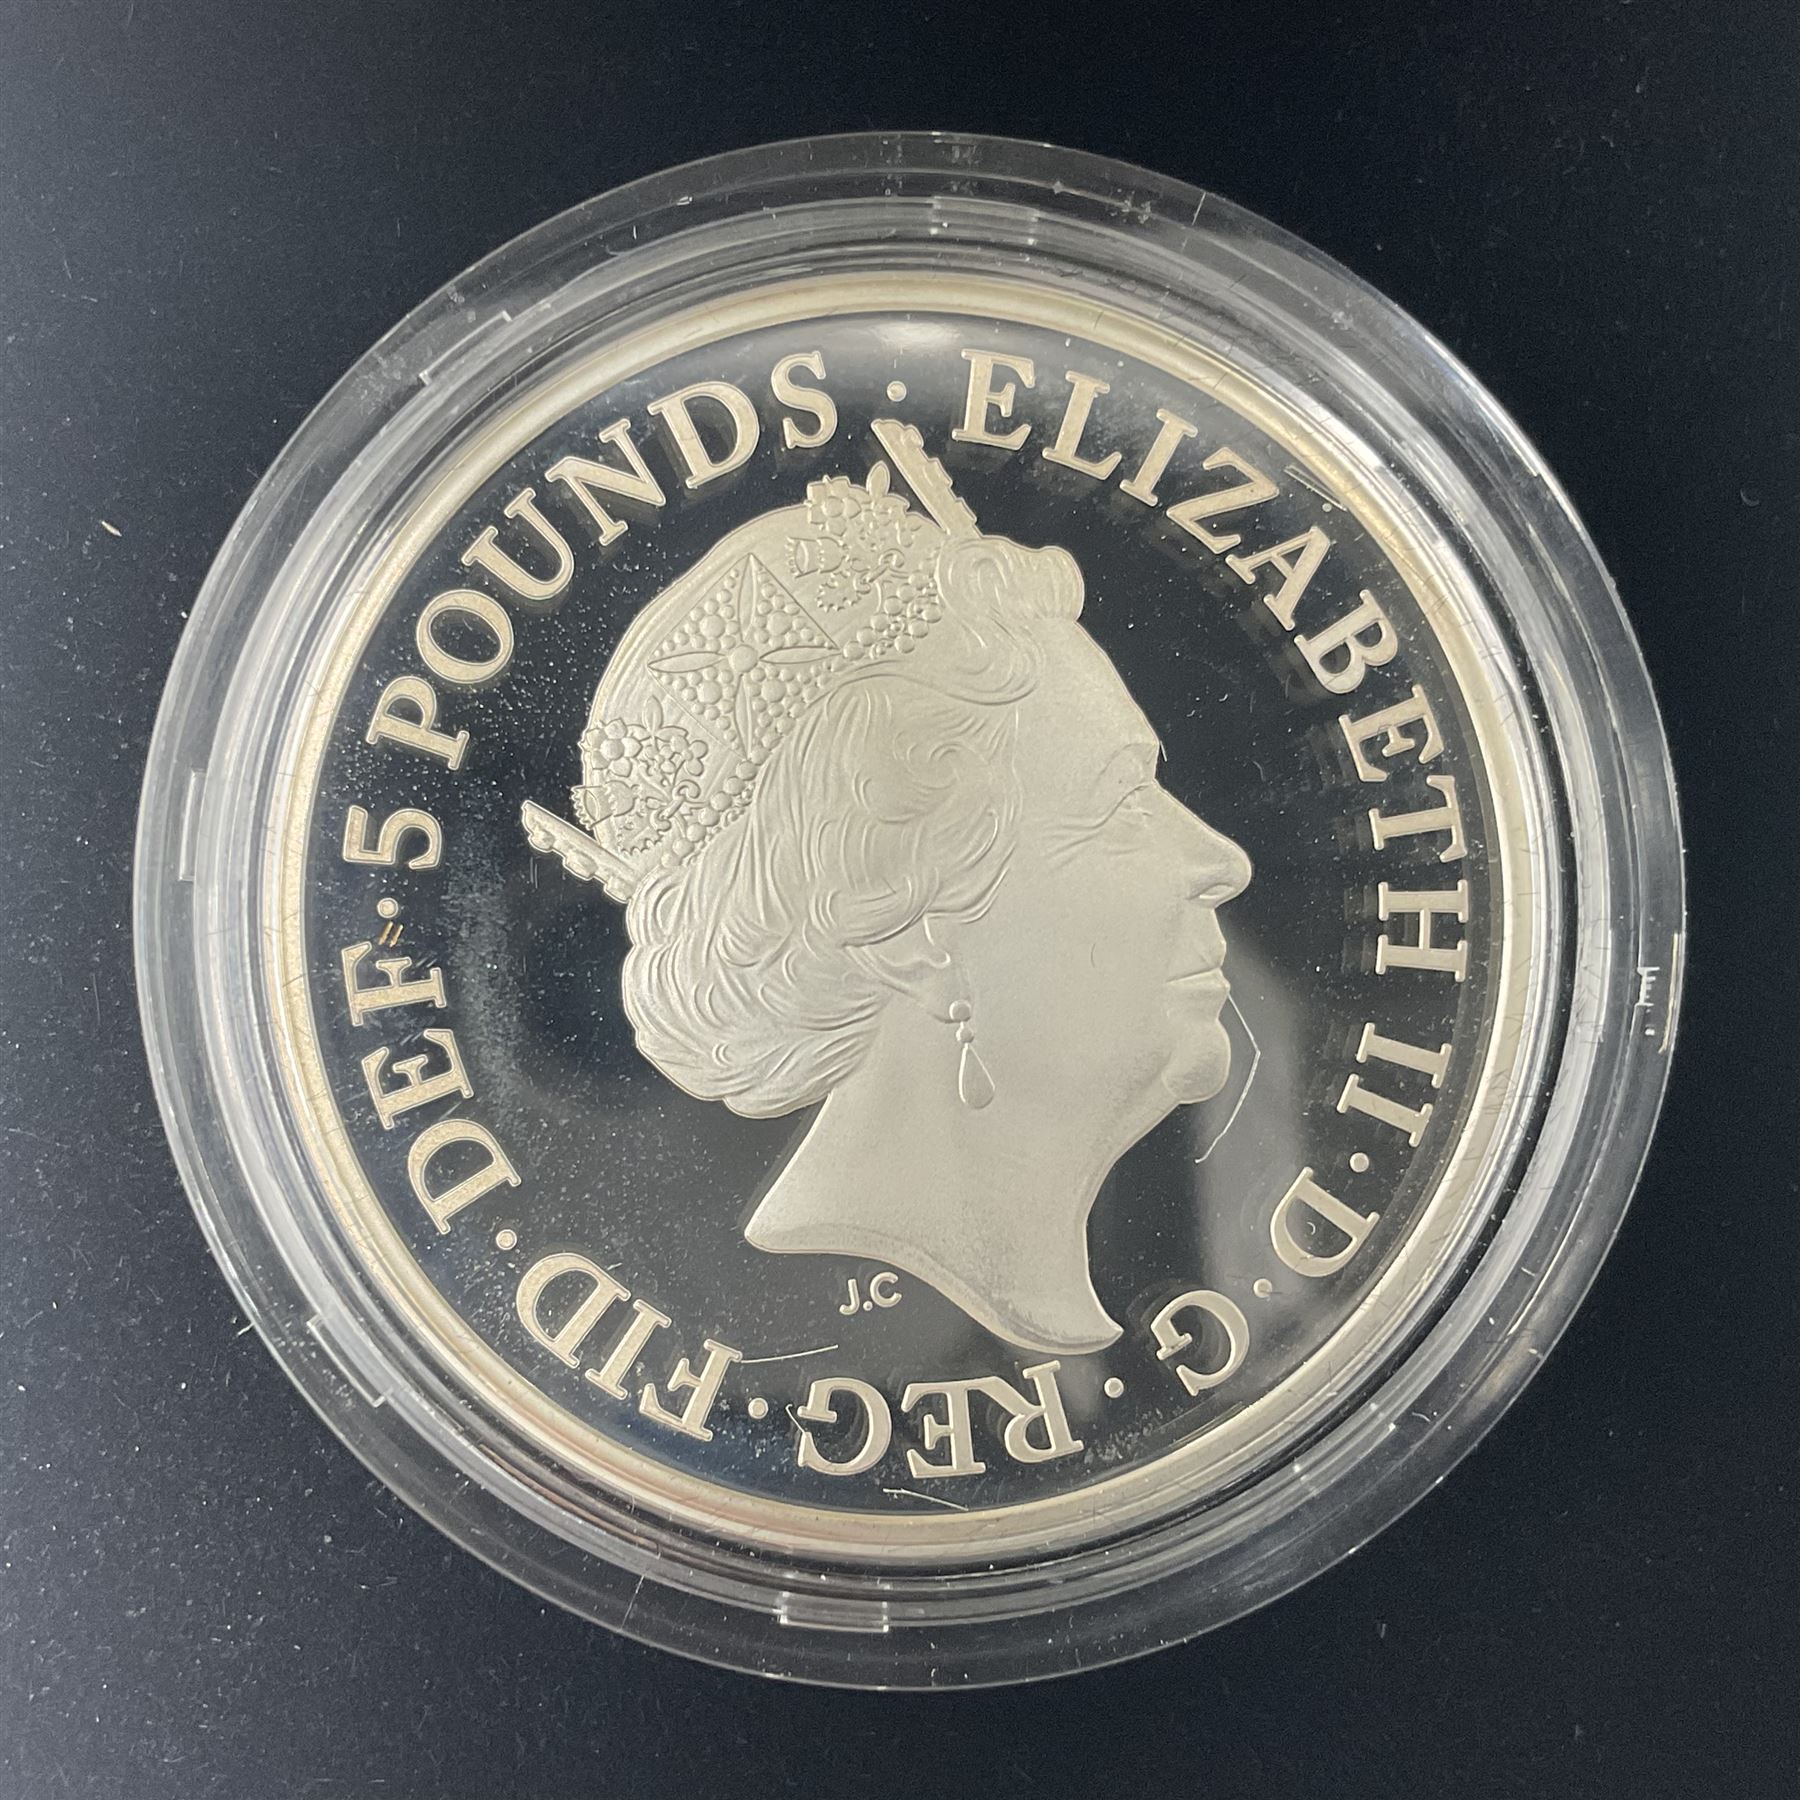 Five The Royal Mint United Kingdom 2018 silver proof piedfort five pound coins - Image 14 of 16